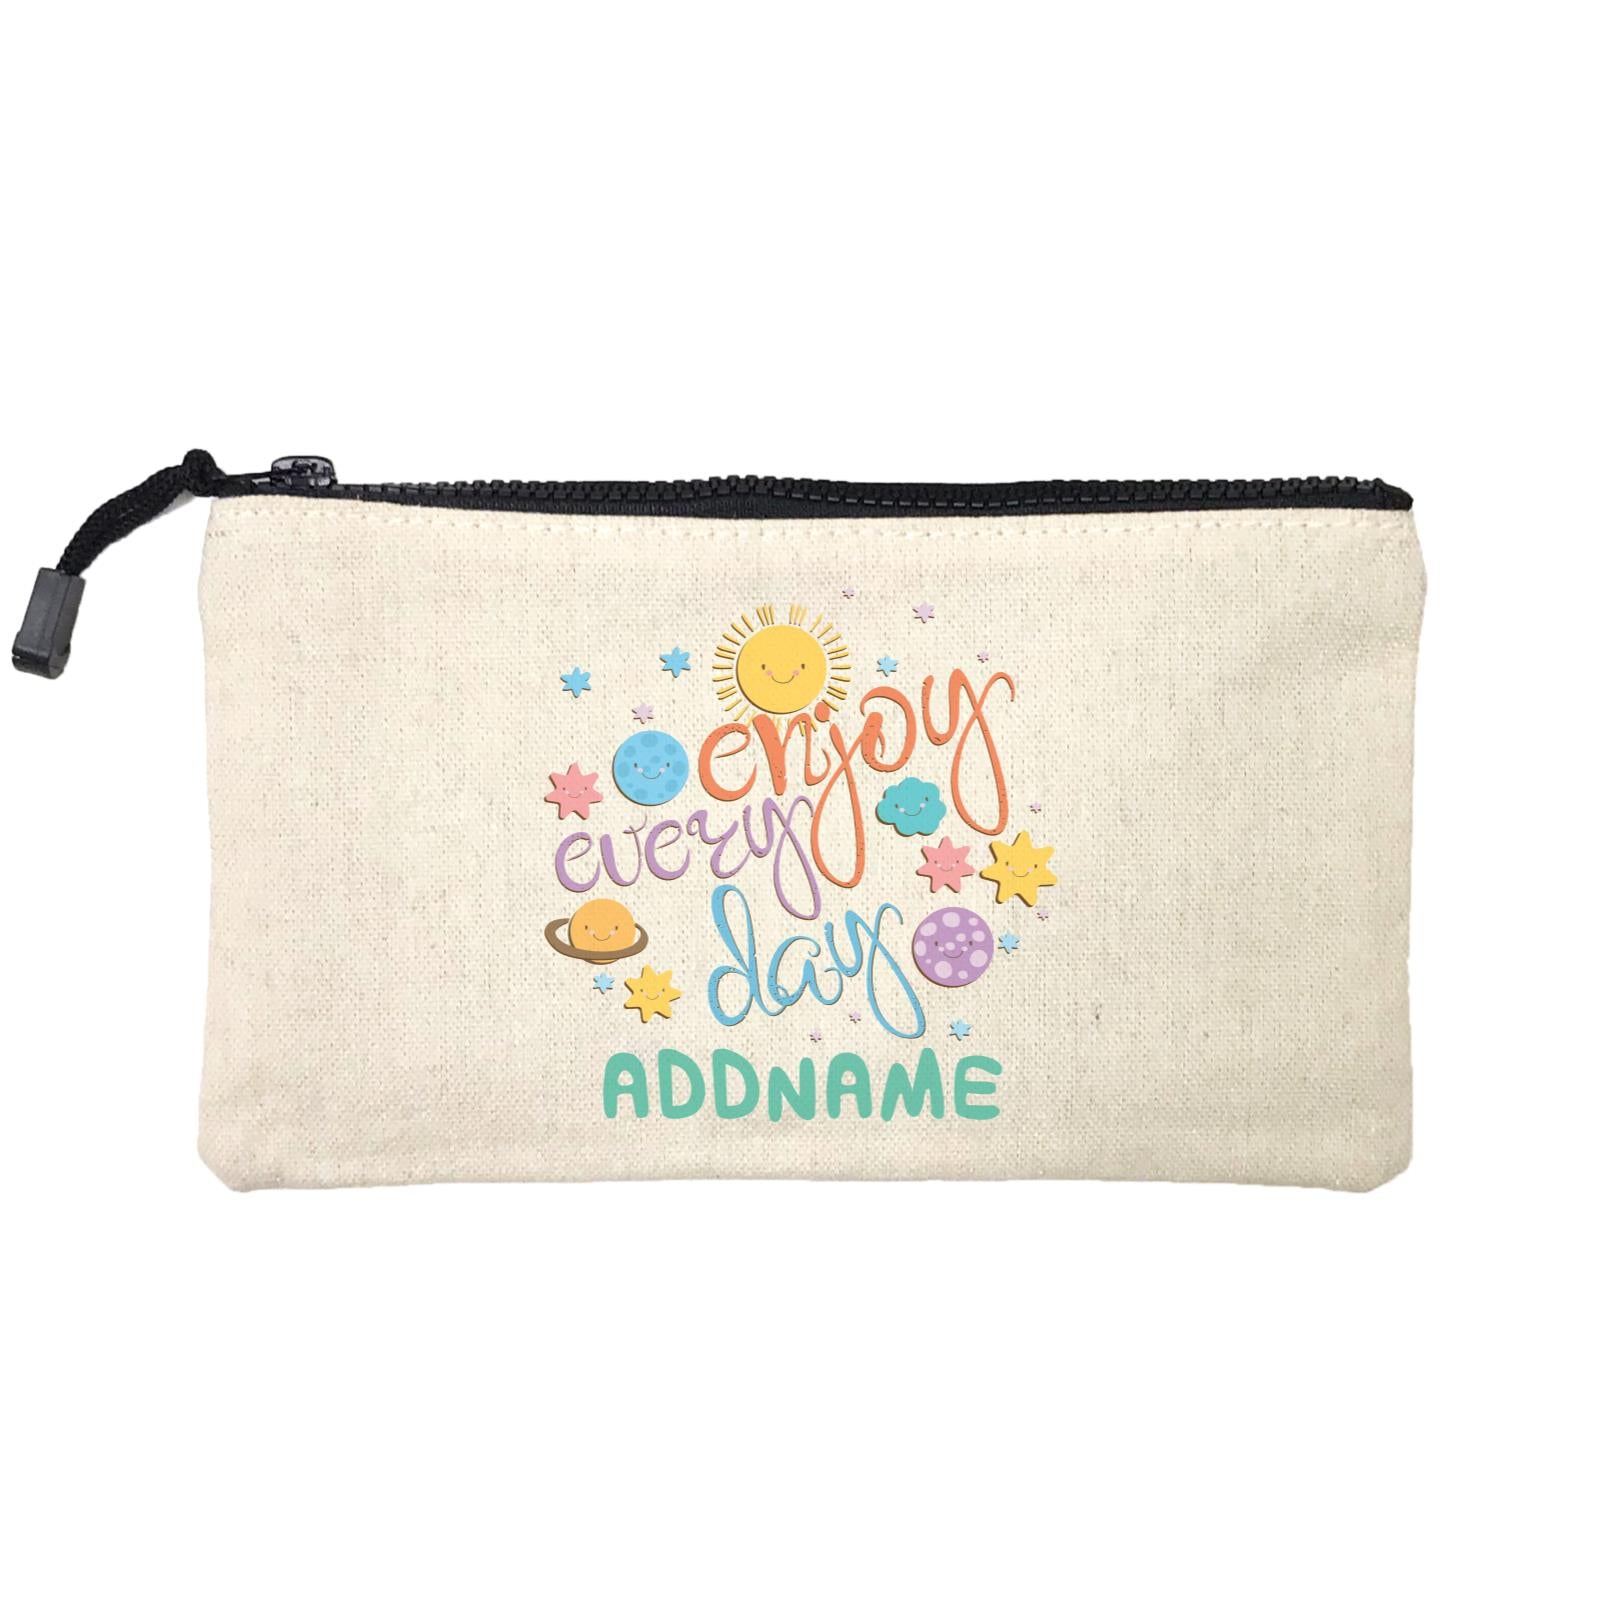 Children's Day Gift Series Enjoy Every Day Space Addname SP Stationery Pouch